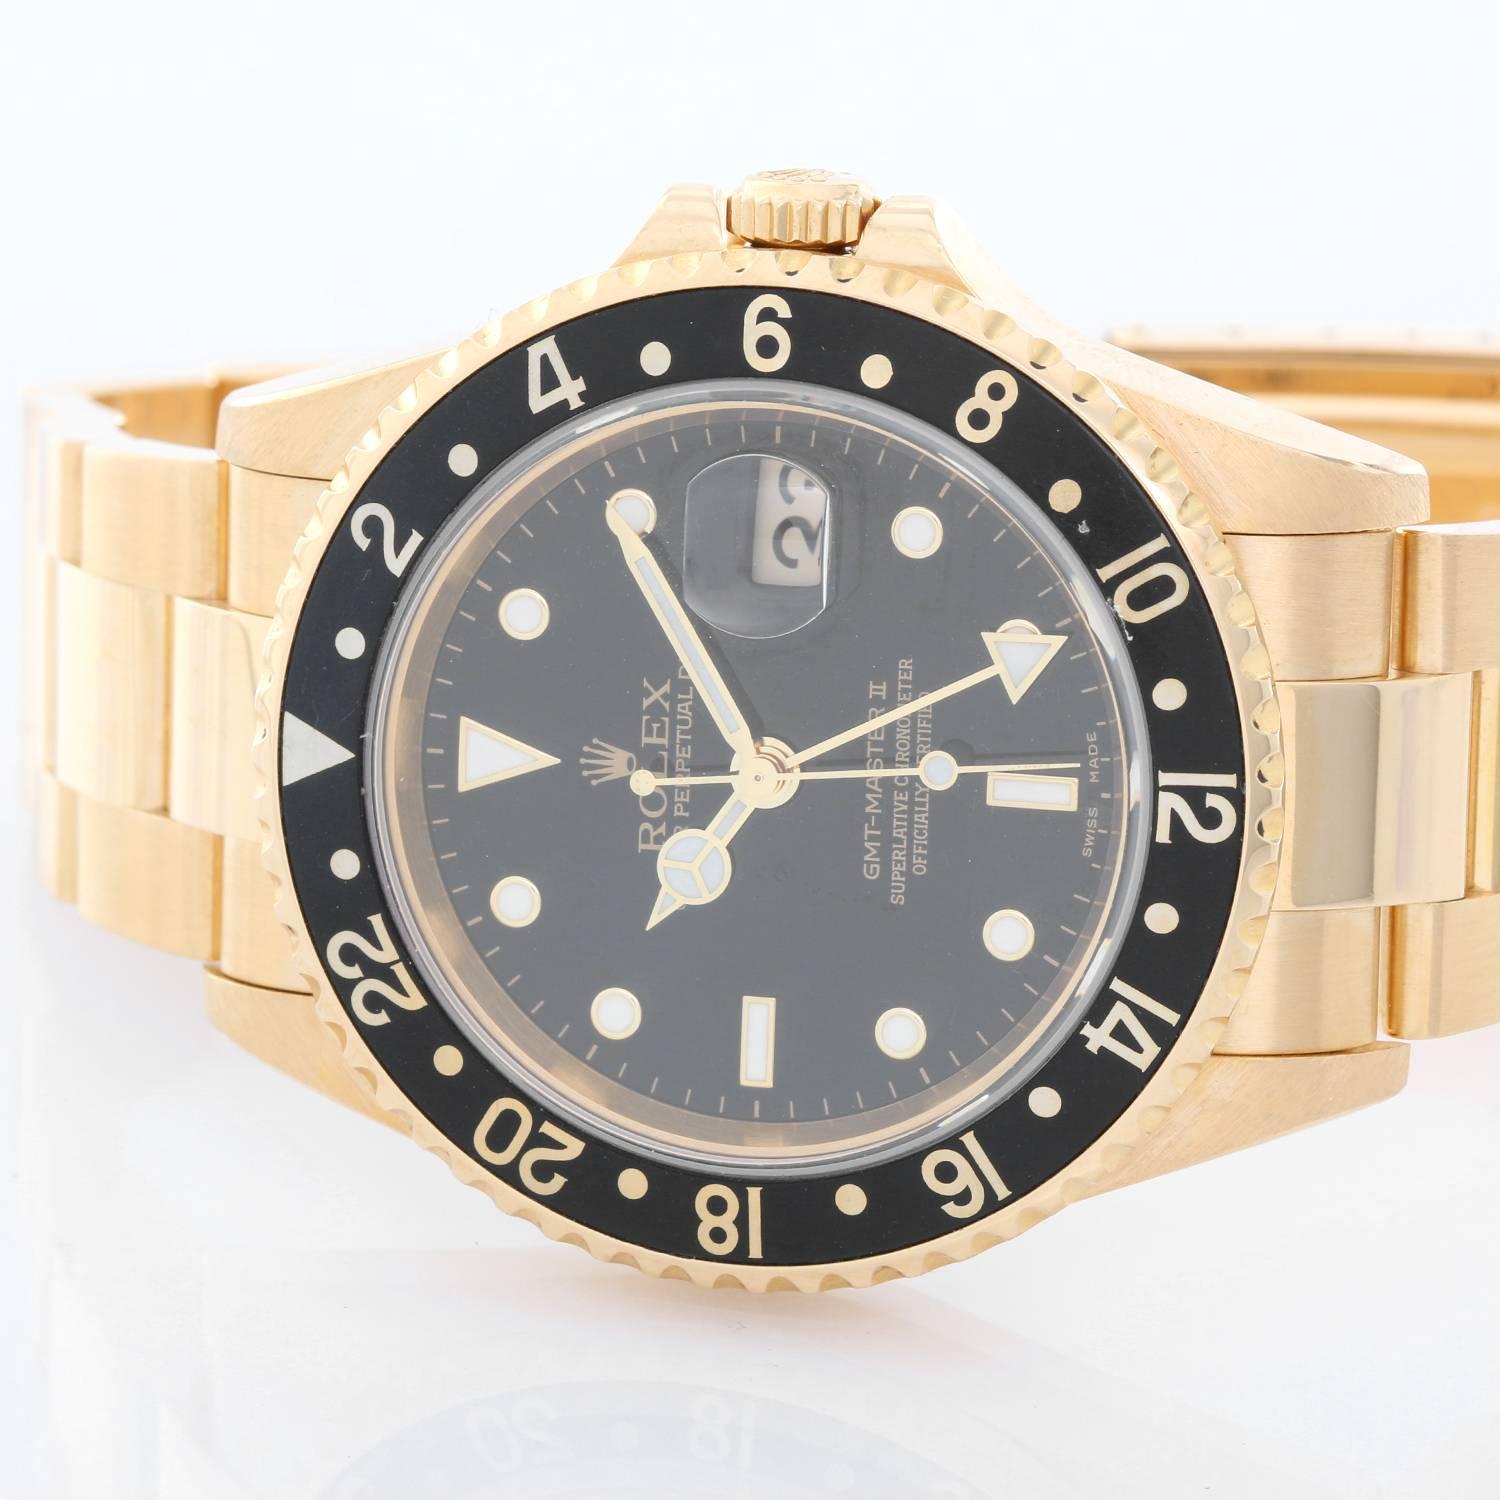 Rolex GMT-Master II 18K Yellow Gold Men's Watch 16718 -  Automatic winding, 31 jewels, Quickset, sapphire crystal. 18k yellow gold case with rotating bezel (40mm diameter). Black dial with luminous markers. 18k yellow gold Oyster bracelet. Pre-owned